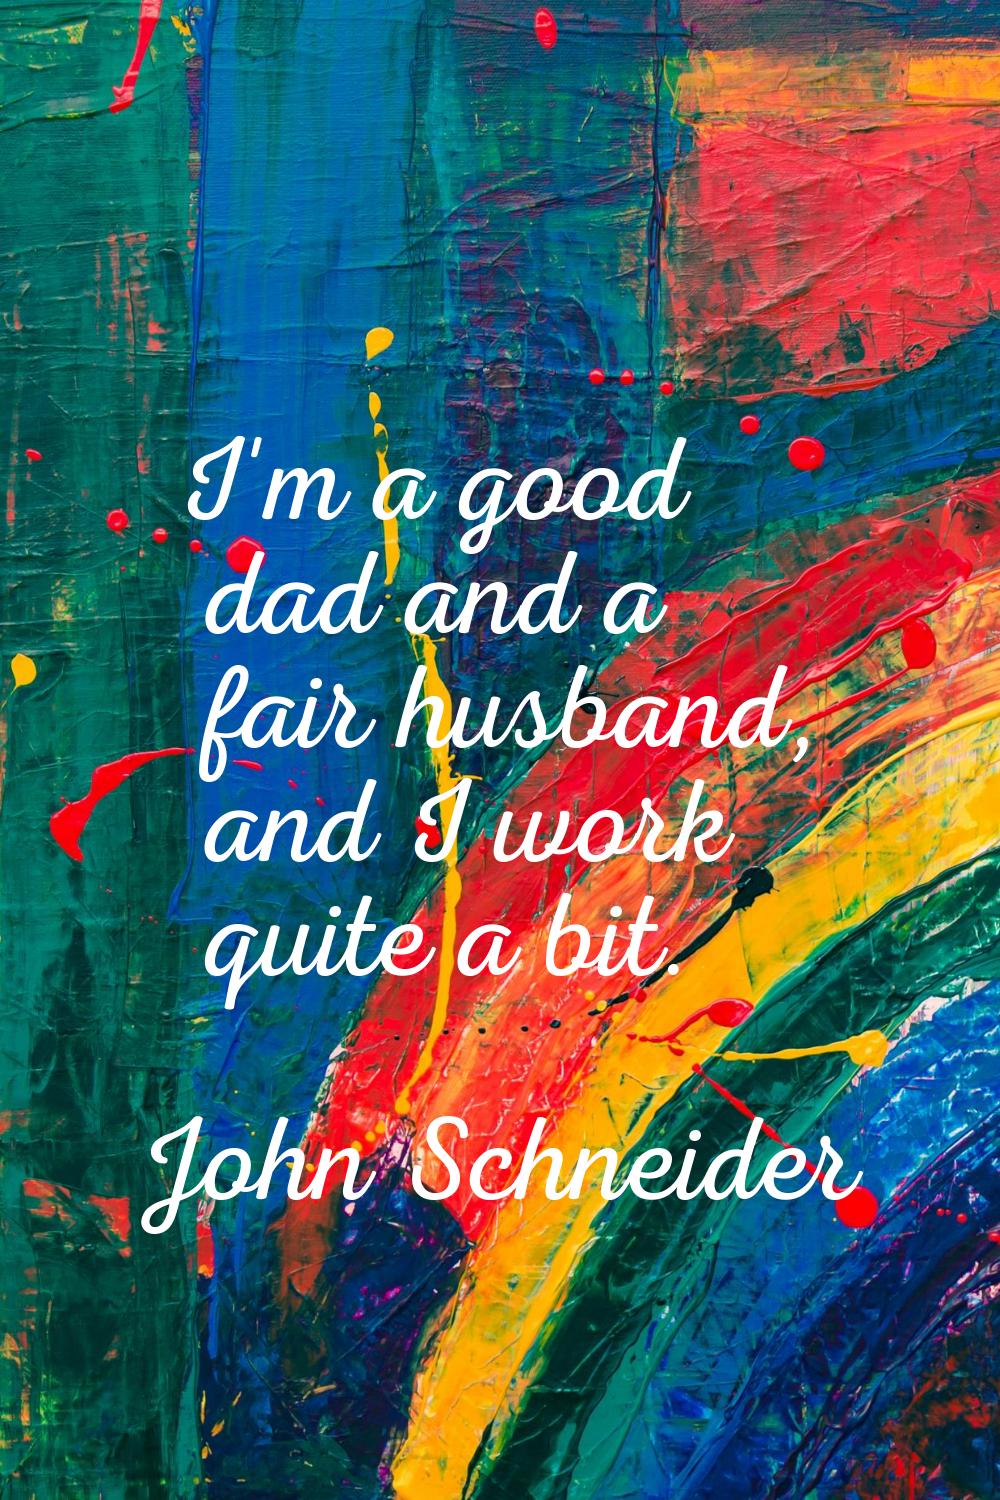 I'm a good dad and a fair husband, and I work quite a bit.